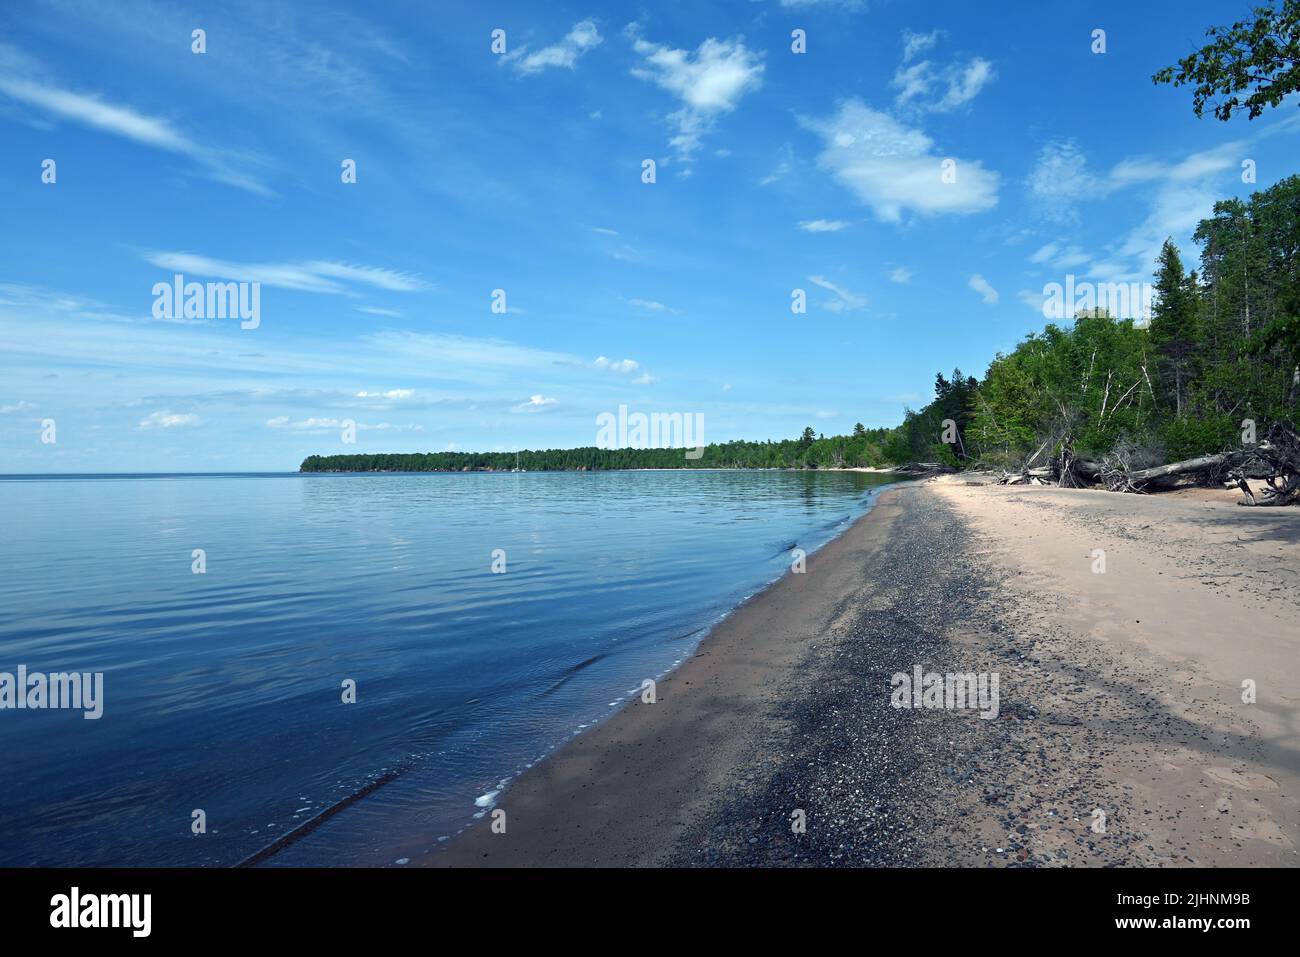 A protected beach on Sand Island in the Apostle Islands National Lakeshore in Lake Superior. Stock Photo